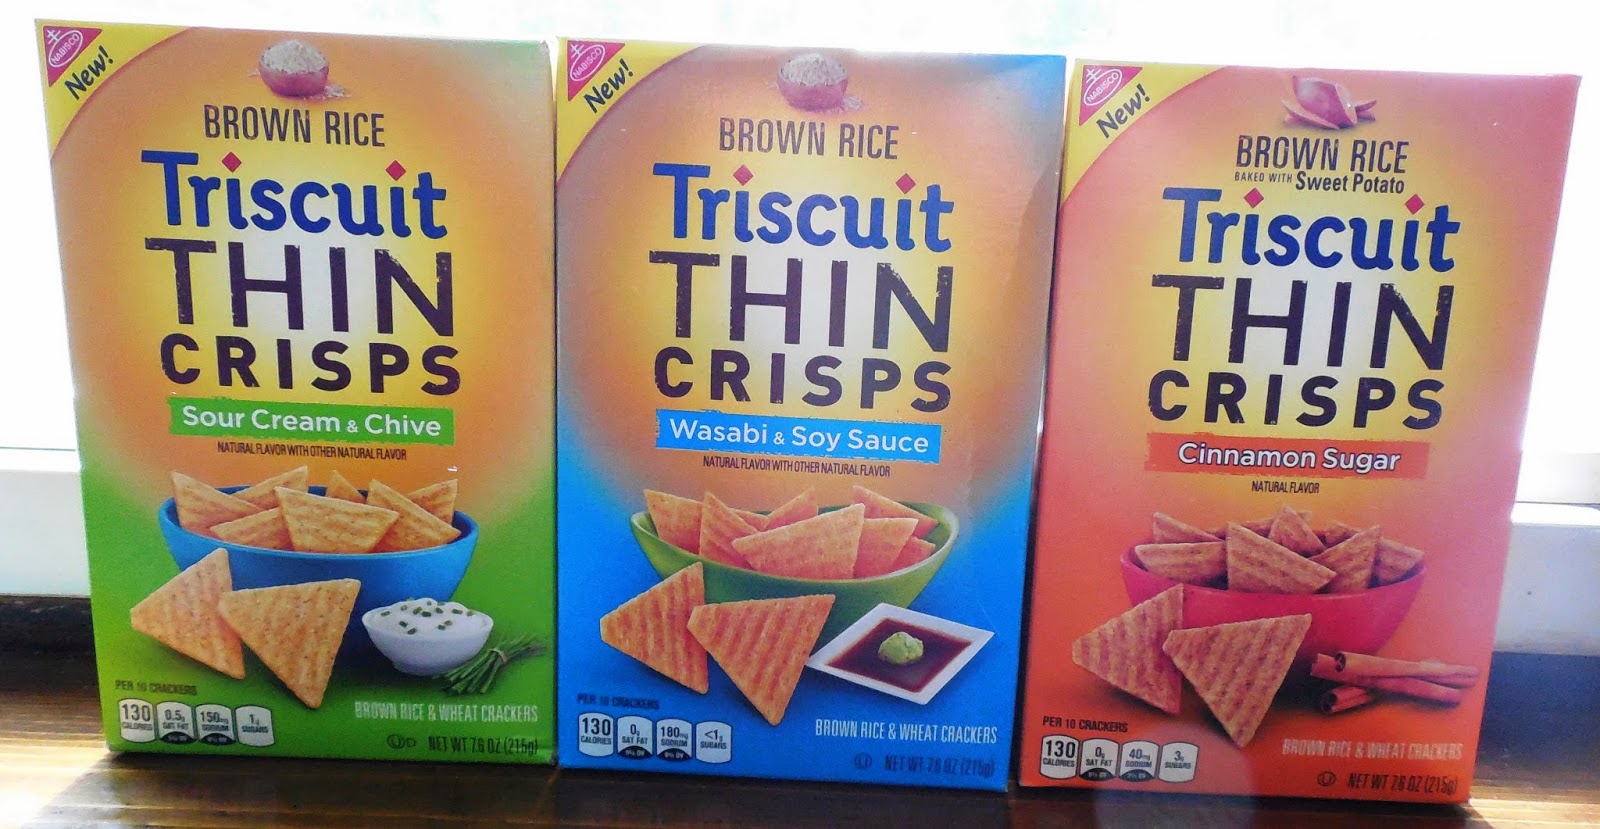 Brown Rice Triscuit Thin Crisps